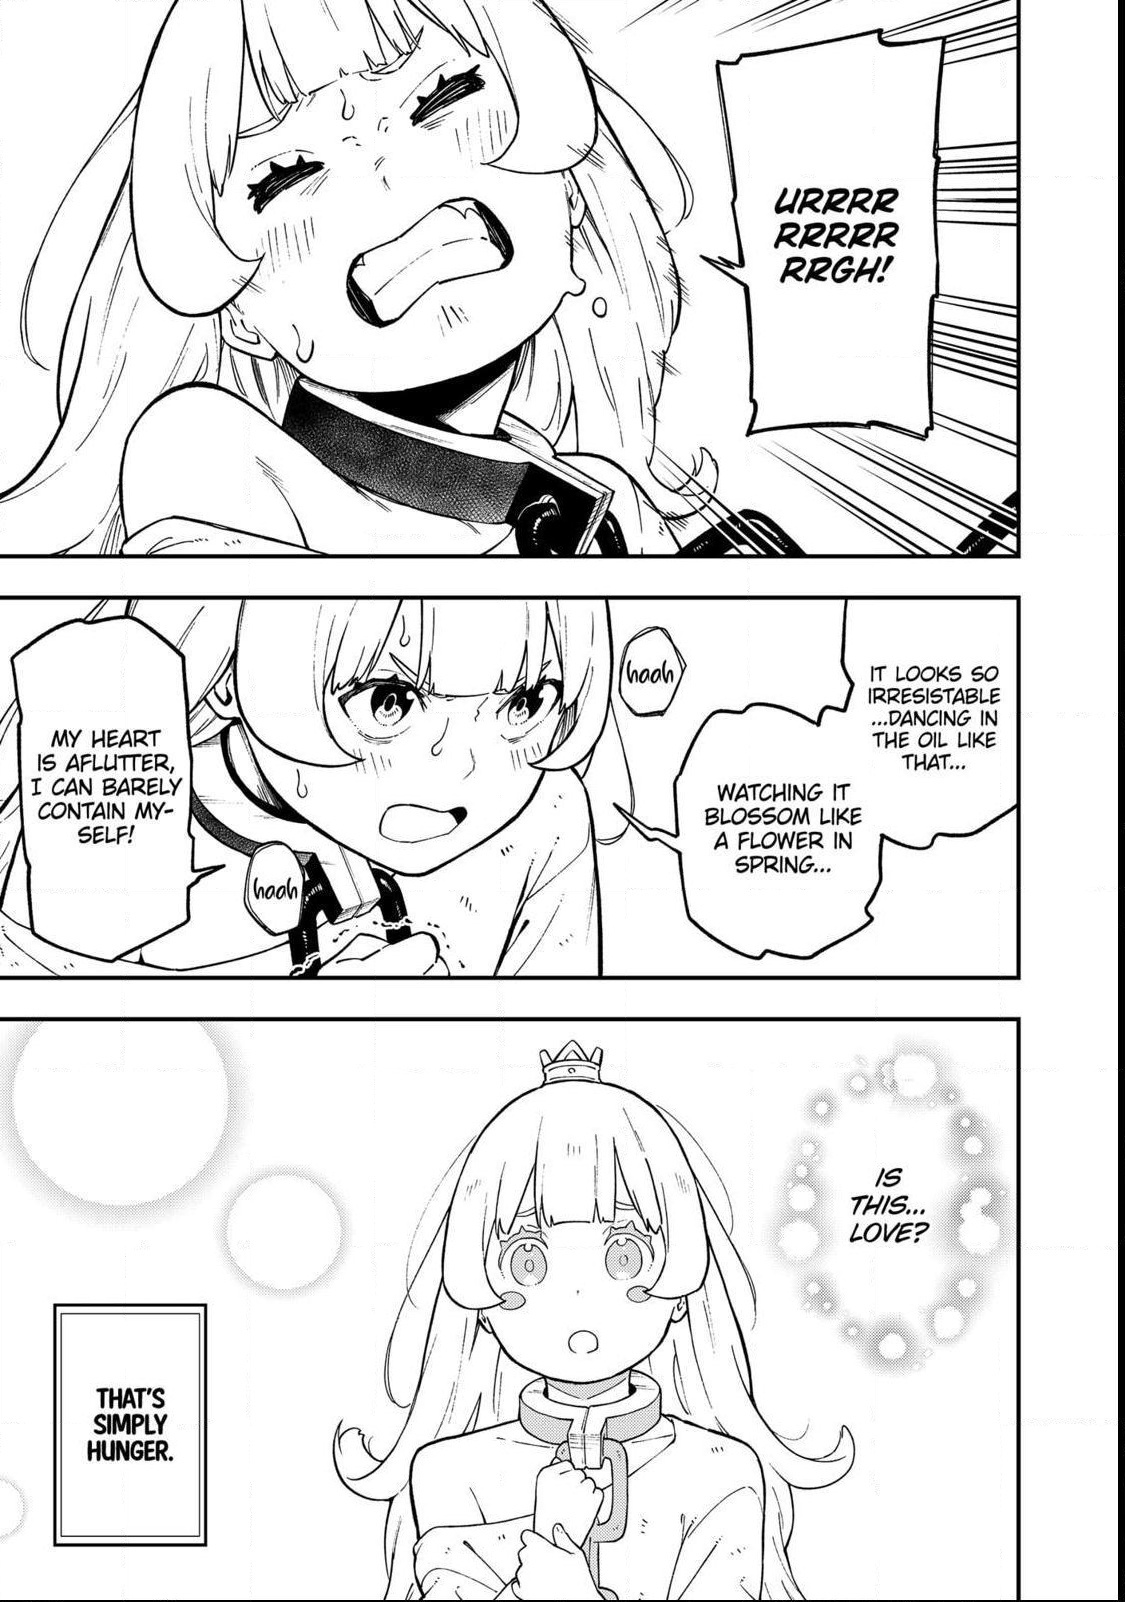 It's Time for "Interrogation", Princess! - chapter 67 - #5